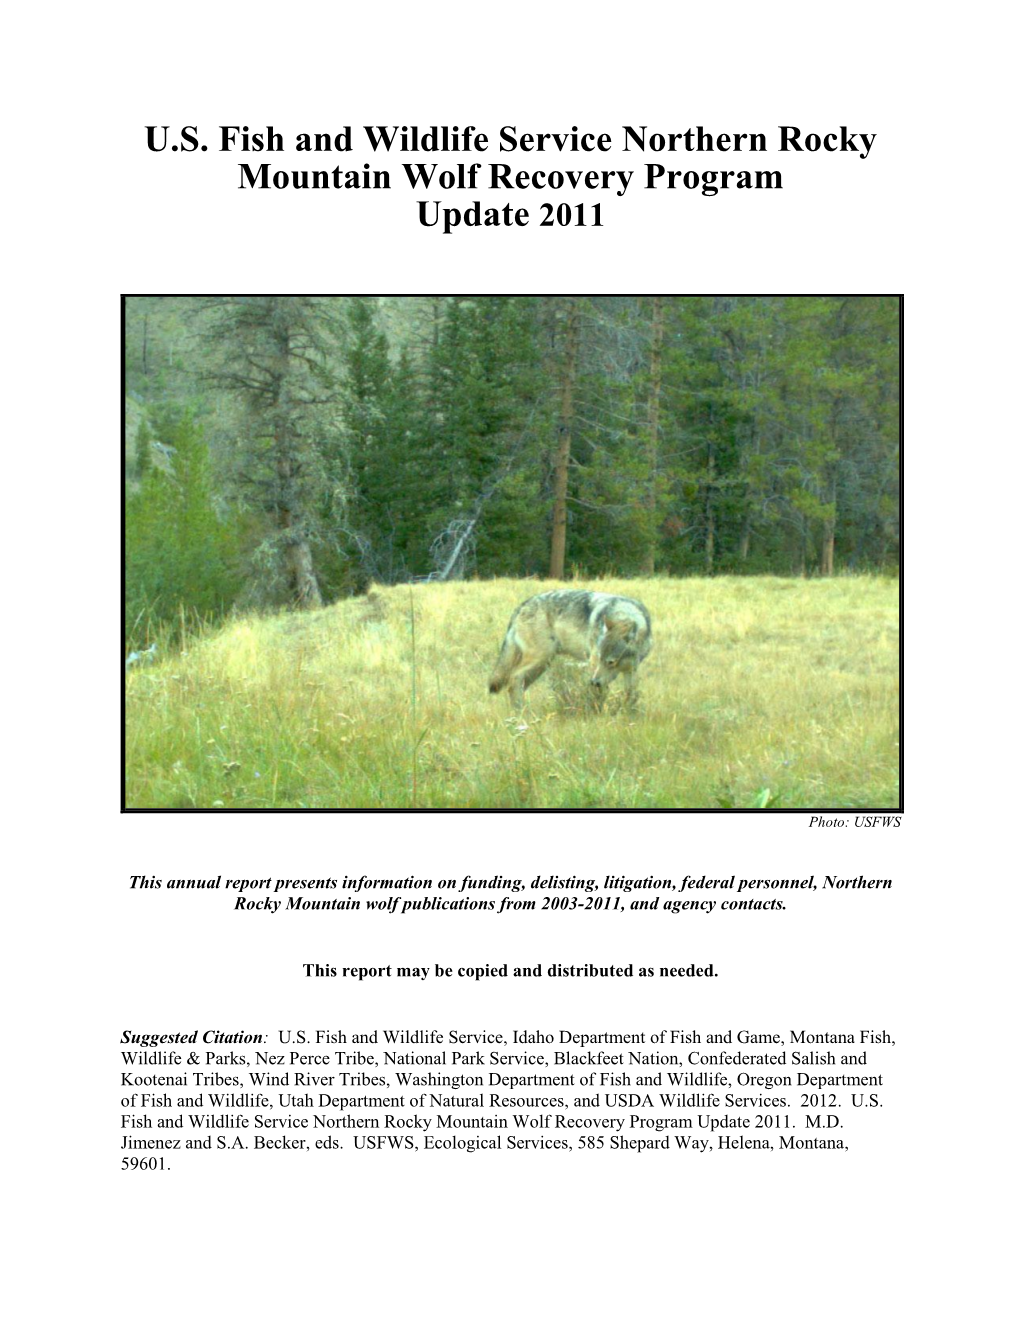 U.S. Fish and Wildlife Service Northern Rocky Mountain Wolf Recovery Program Update 2011